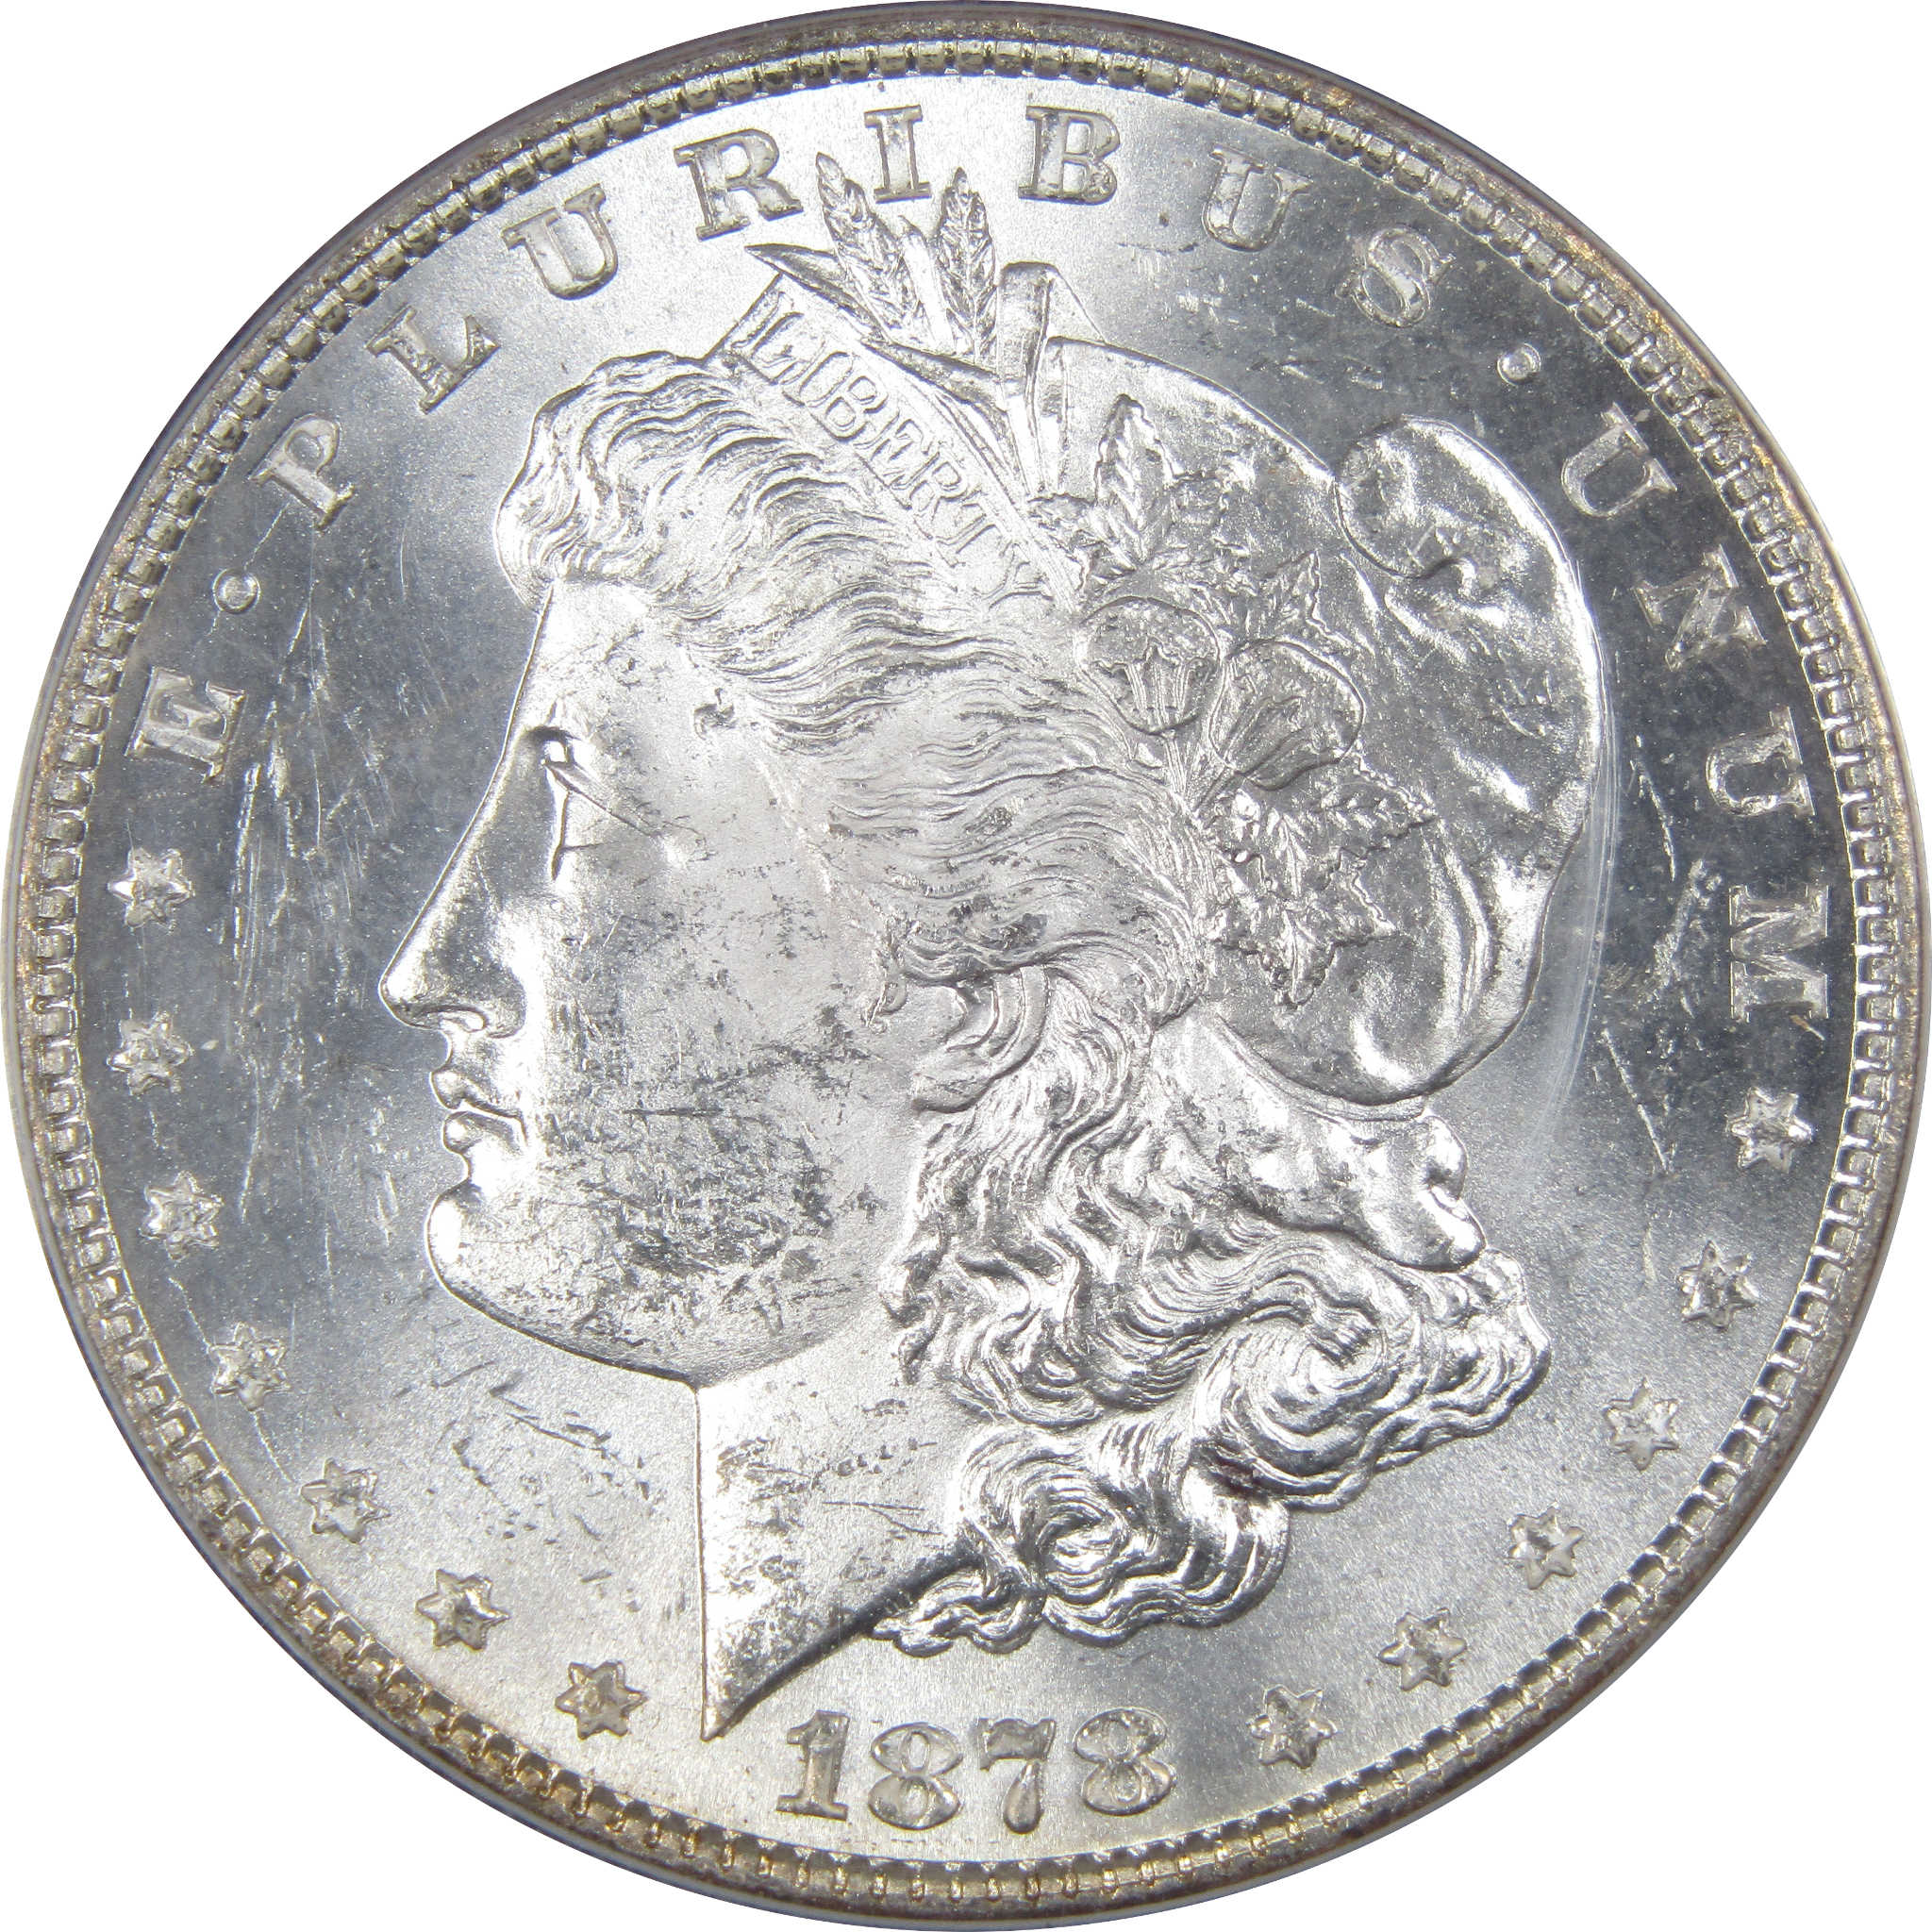 1878 8TF Morgan Dollar MS 62 ANACS 90% Silver Uncirculated SKU:IPC5704 - Morgan coin - Morgan silver dollar - Morgan silver dollar for sale - Profile Coins &amp; Collectibles